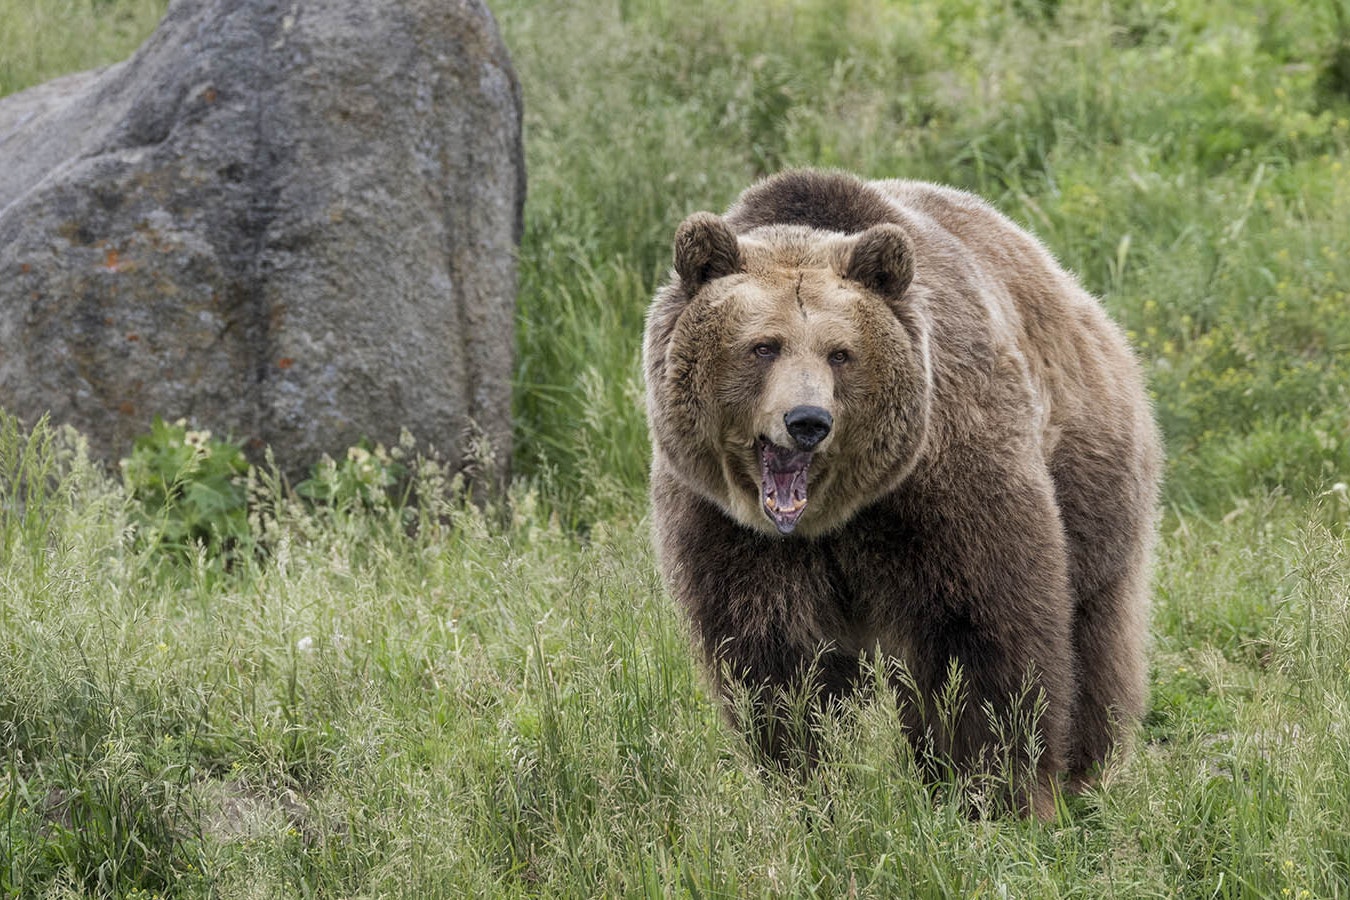 A grizzly vocalizes in the Wyoming wilderness in this file photo. A young male grizzly was confirmed in the Bighorn Mountains of Wyoming, Game and Fish announced Monday, the first confirmation of years of rumors and stories that grizzlies have pushed east from Yellowstone.